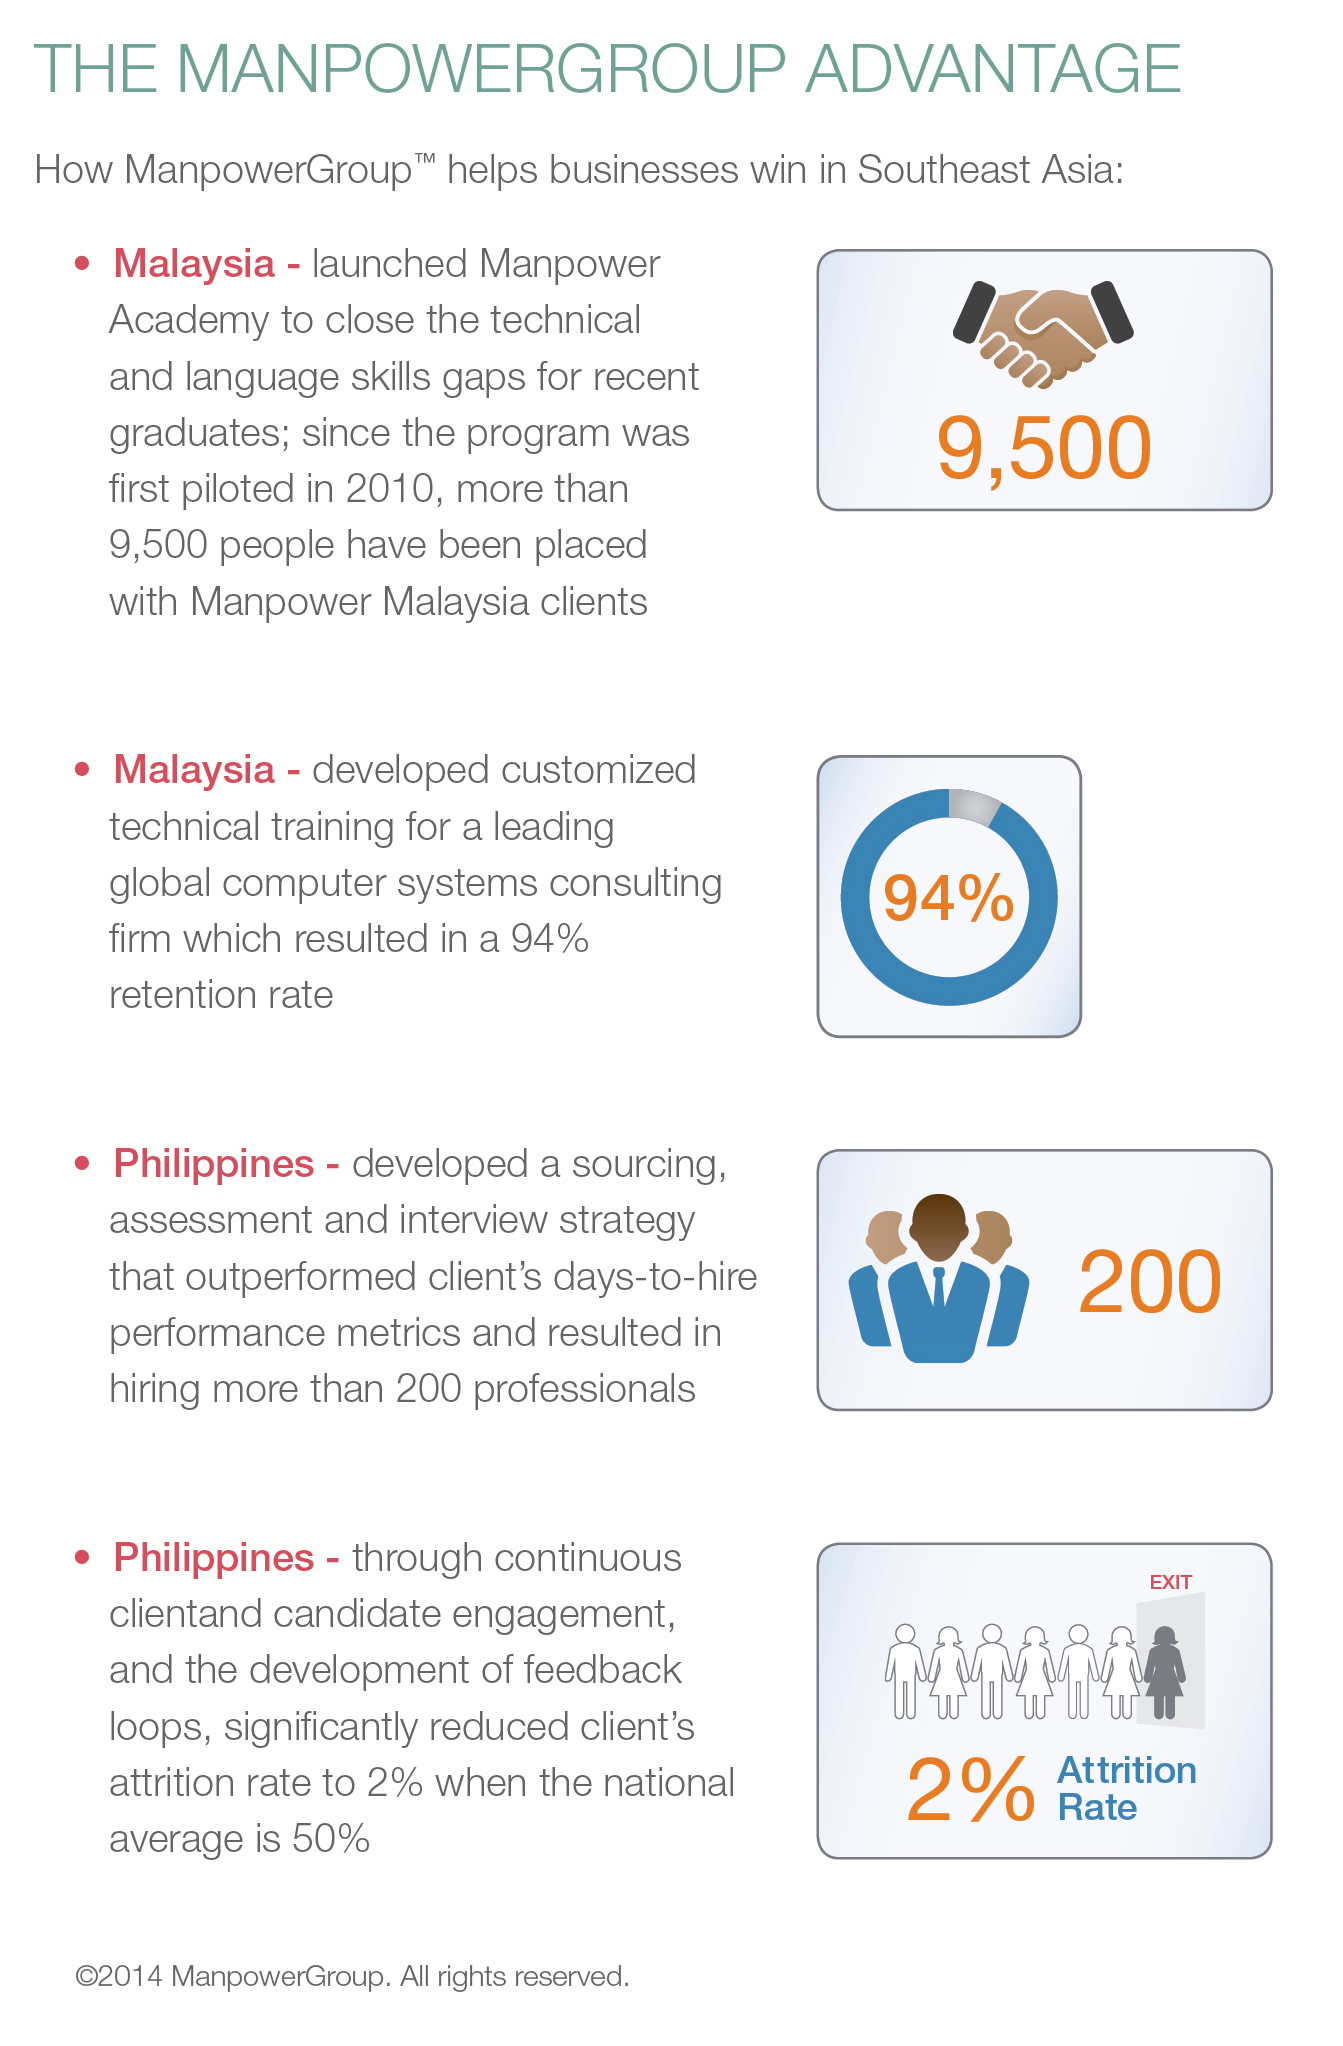 Years of developing region's communities of talent make ManpowerGroup Solutions uniquely poised to help clients win and stay ahead of the competition when it comes to their greatest asset - talent.